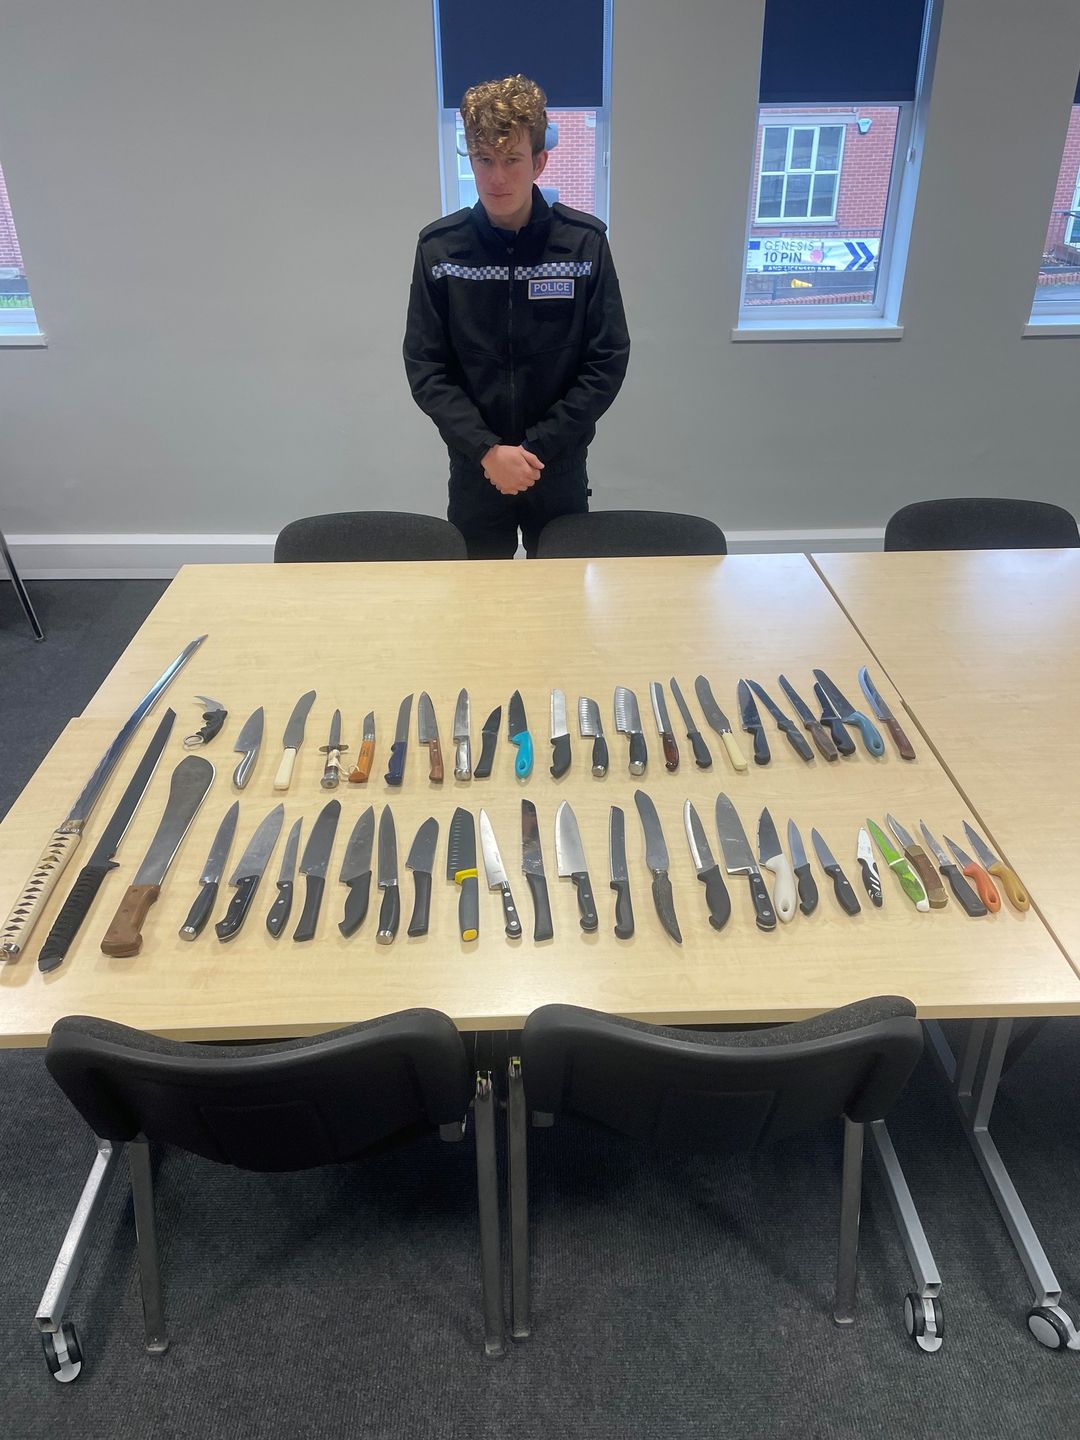 Almost 50 knives collected by Police during Operation Sceptre